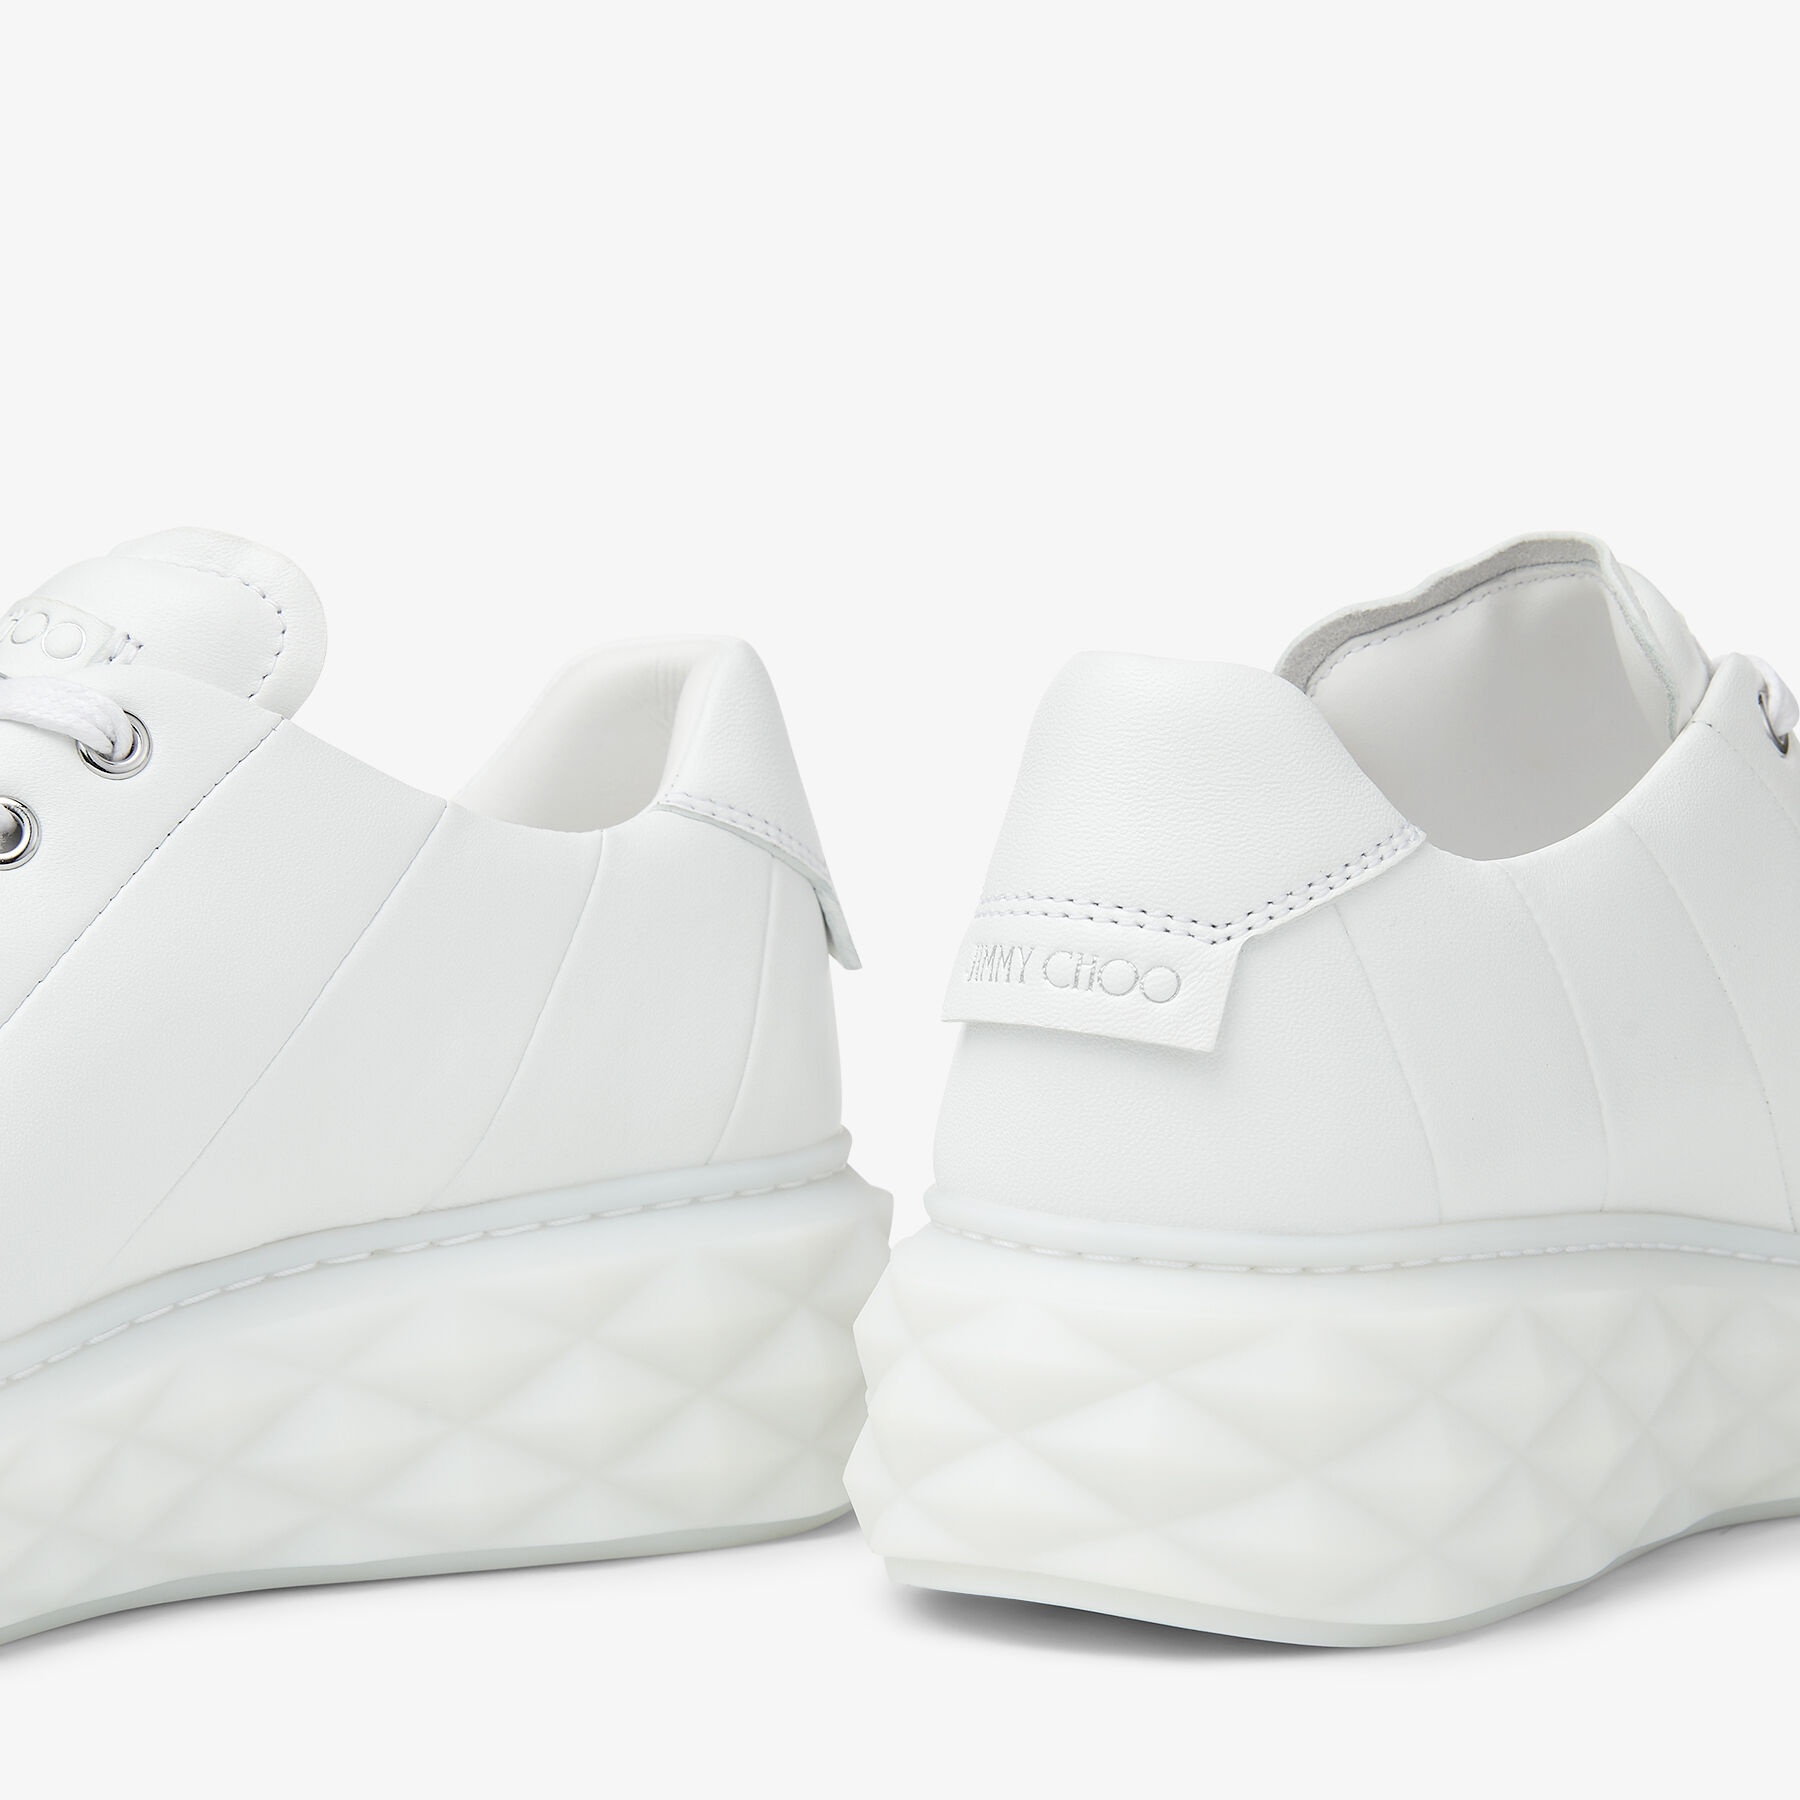 Diamond Light Maxi/F
White Nappa Leather Low-Top Trainers with Platform Sole - 4